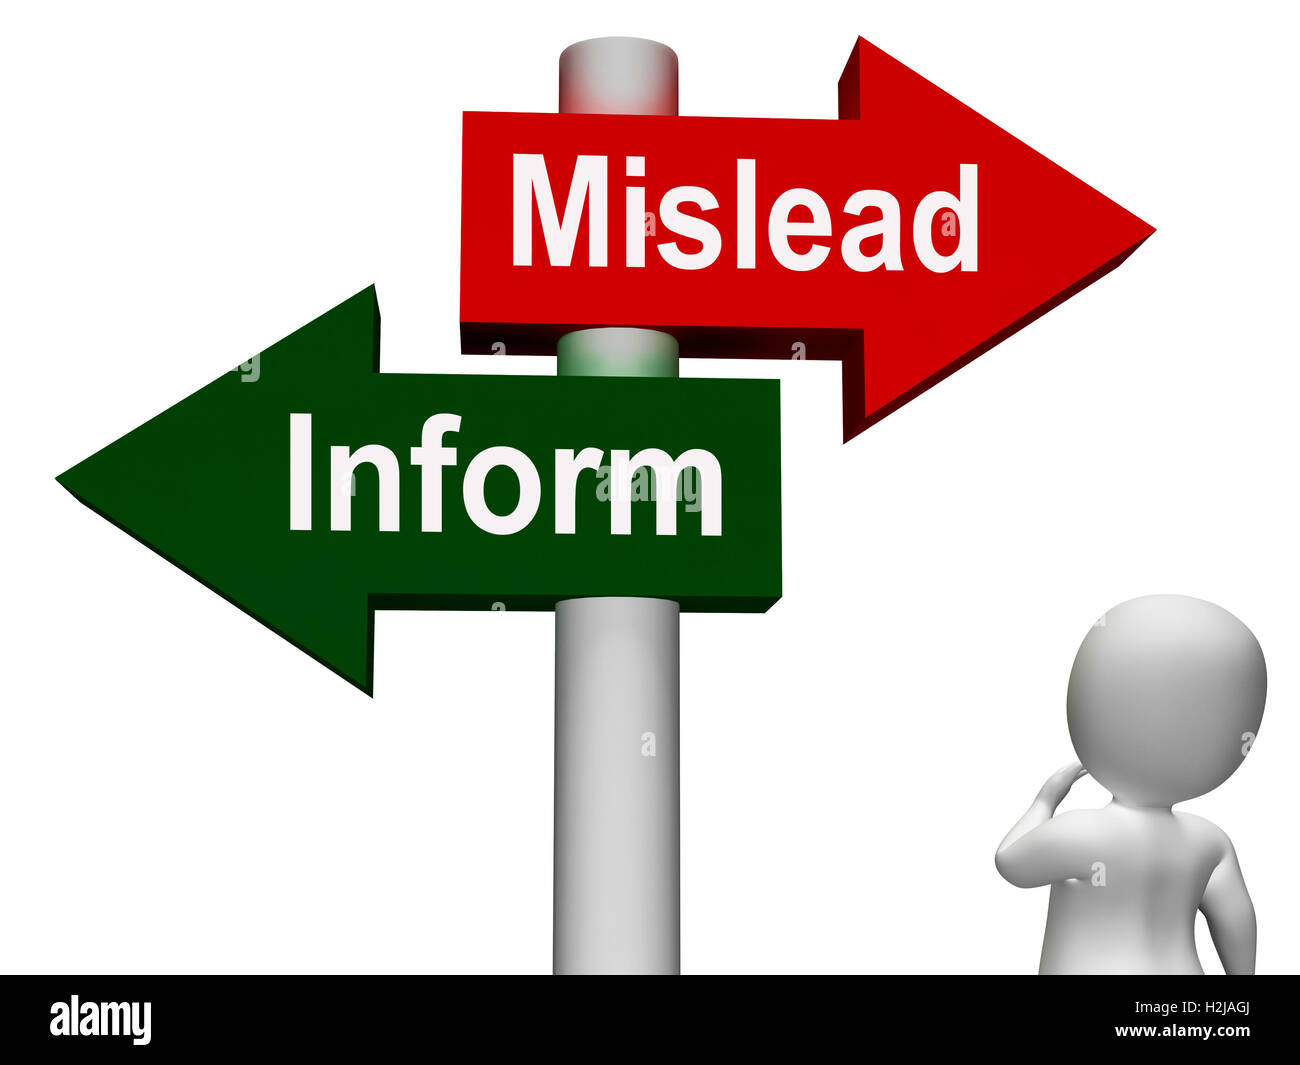 Mislead Inform Signpost Shows Misleading Or Informative Advice Stock Photo